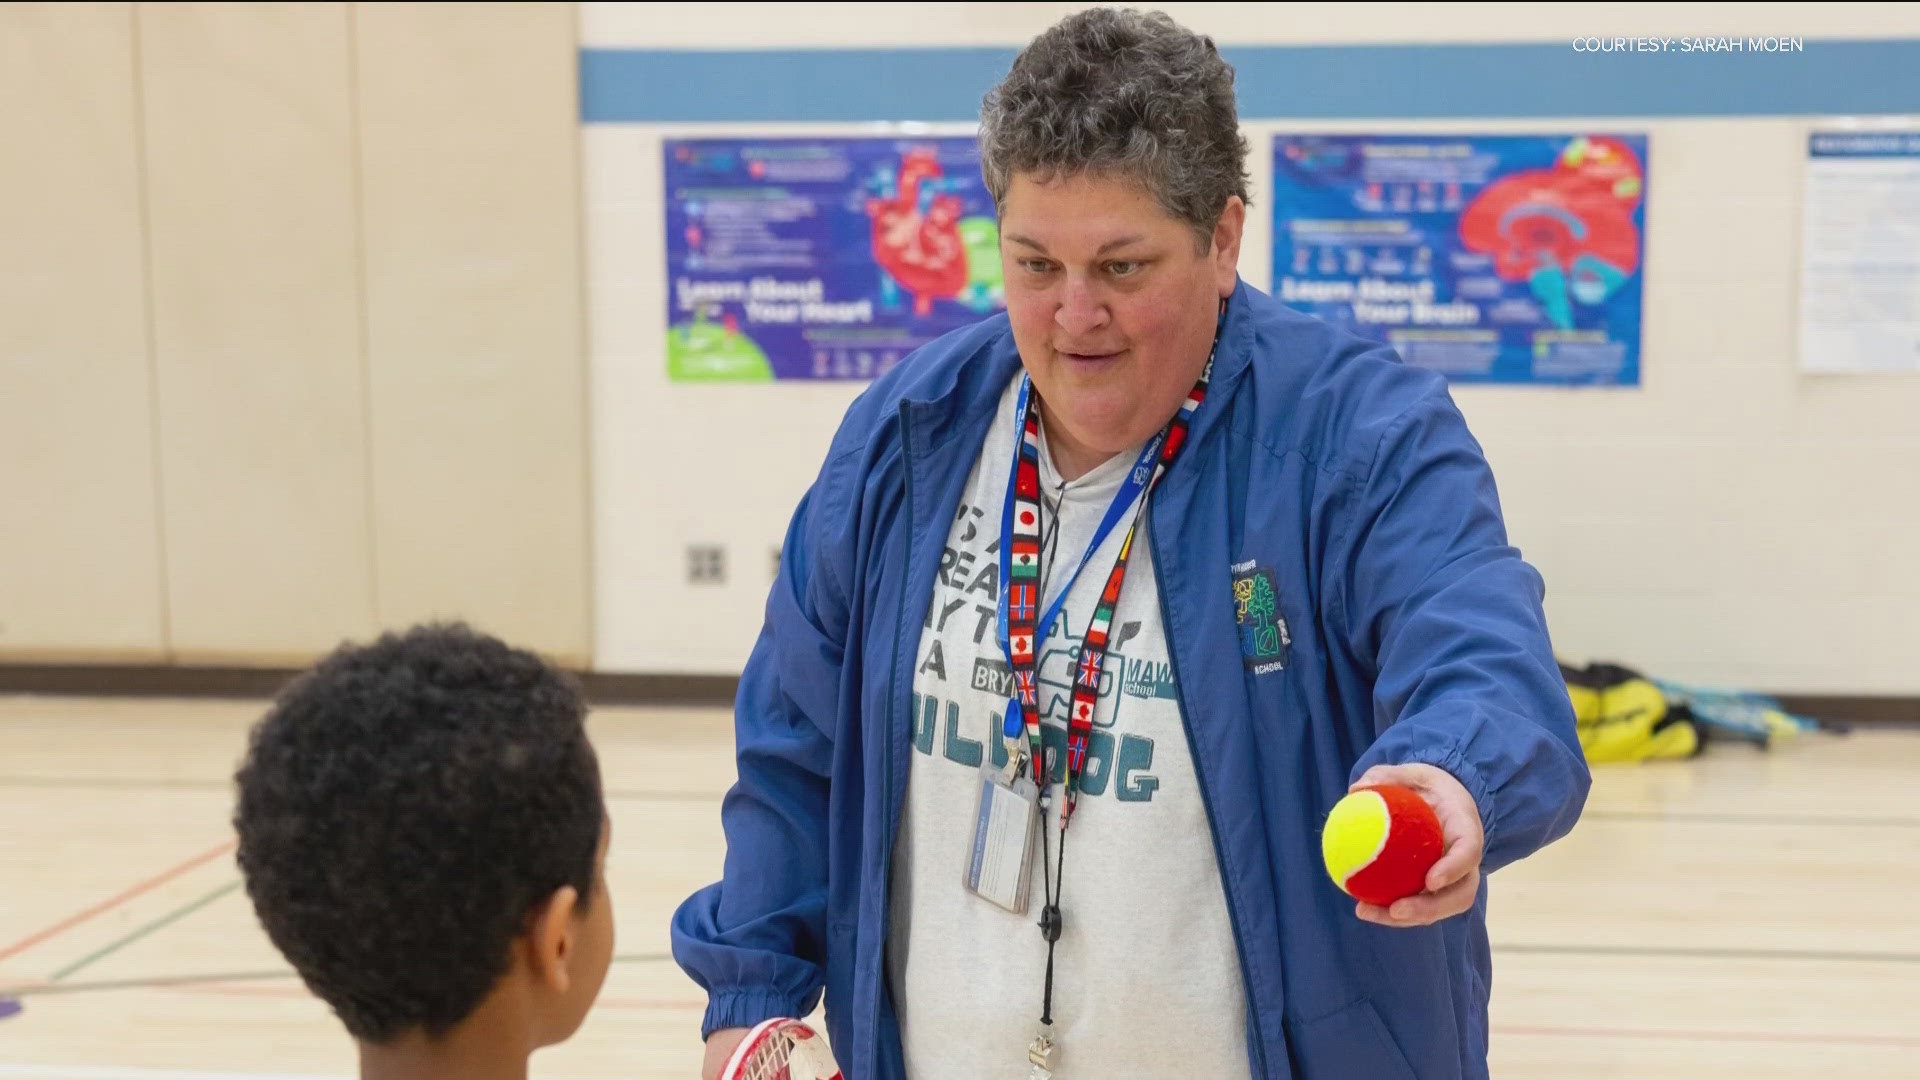 After 28 years as the physical education teacher at Bryn Mawr Elementary School, Ms. Anita Chavez is retiring next month.